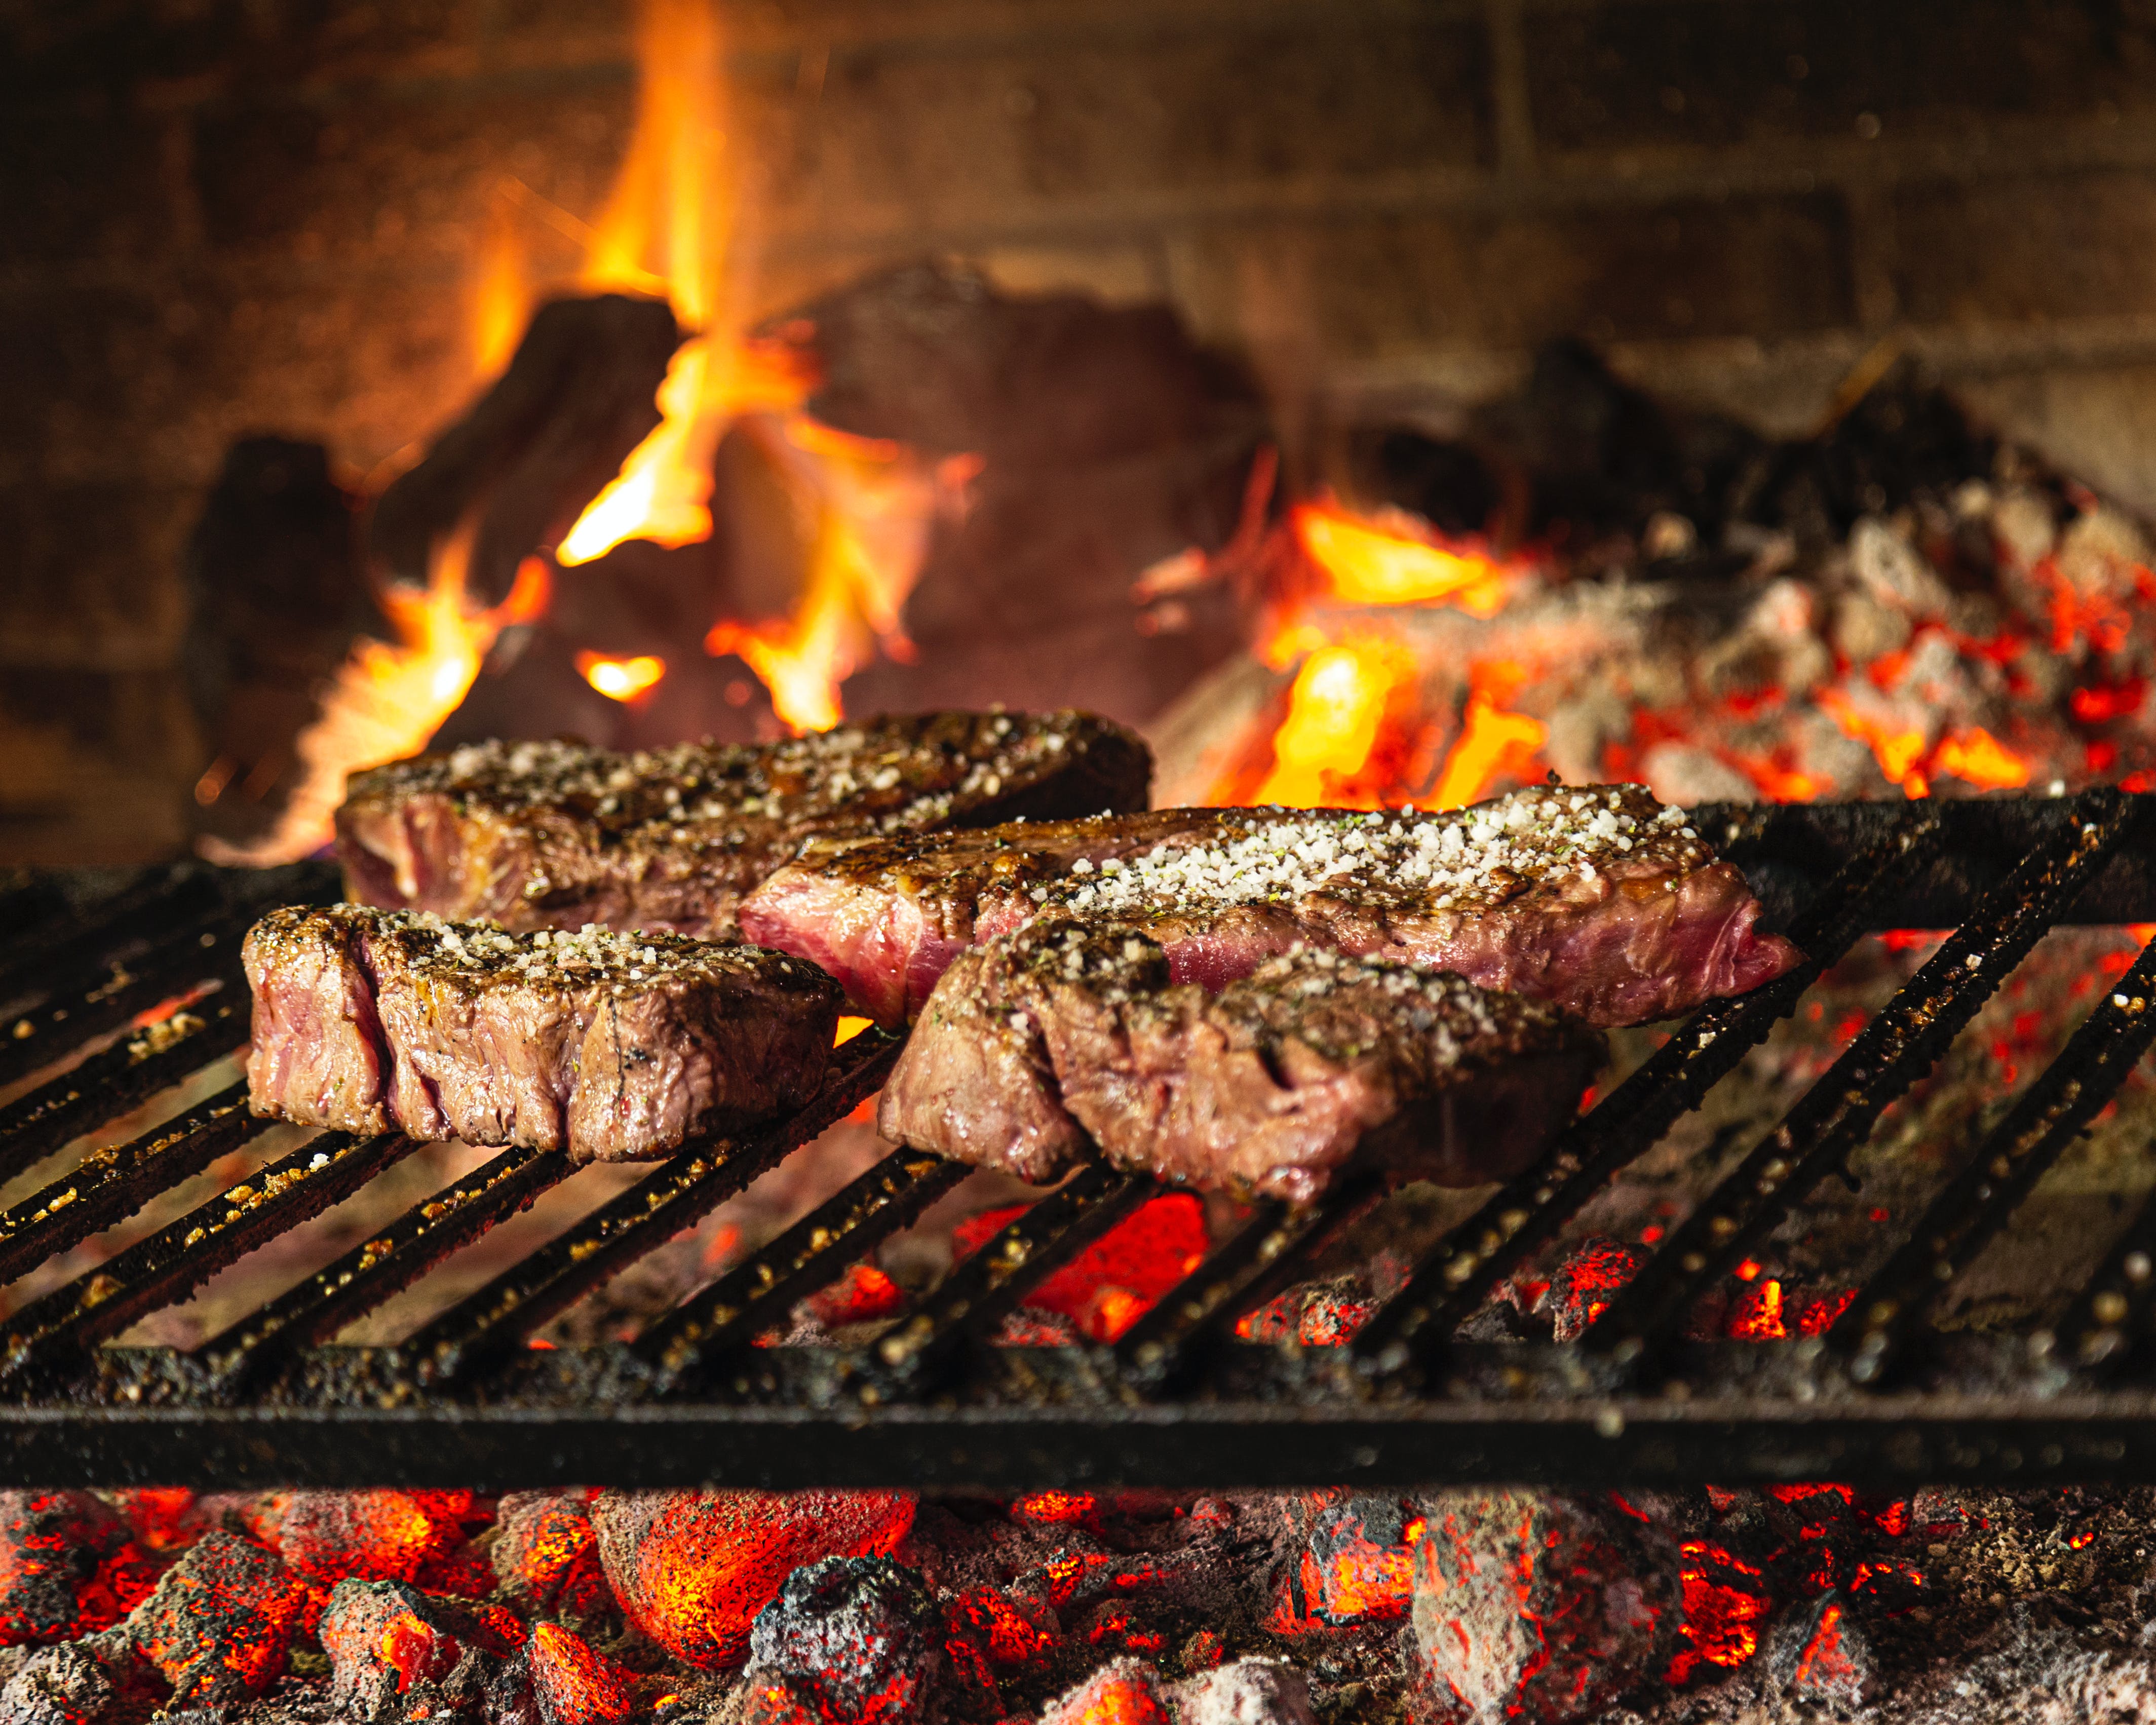 Grilled meat on an Argentine grill | Source: Pexels